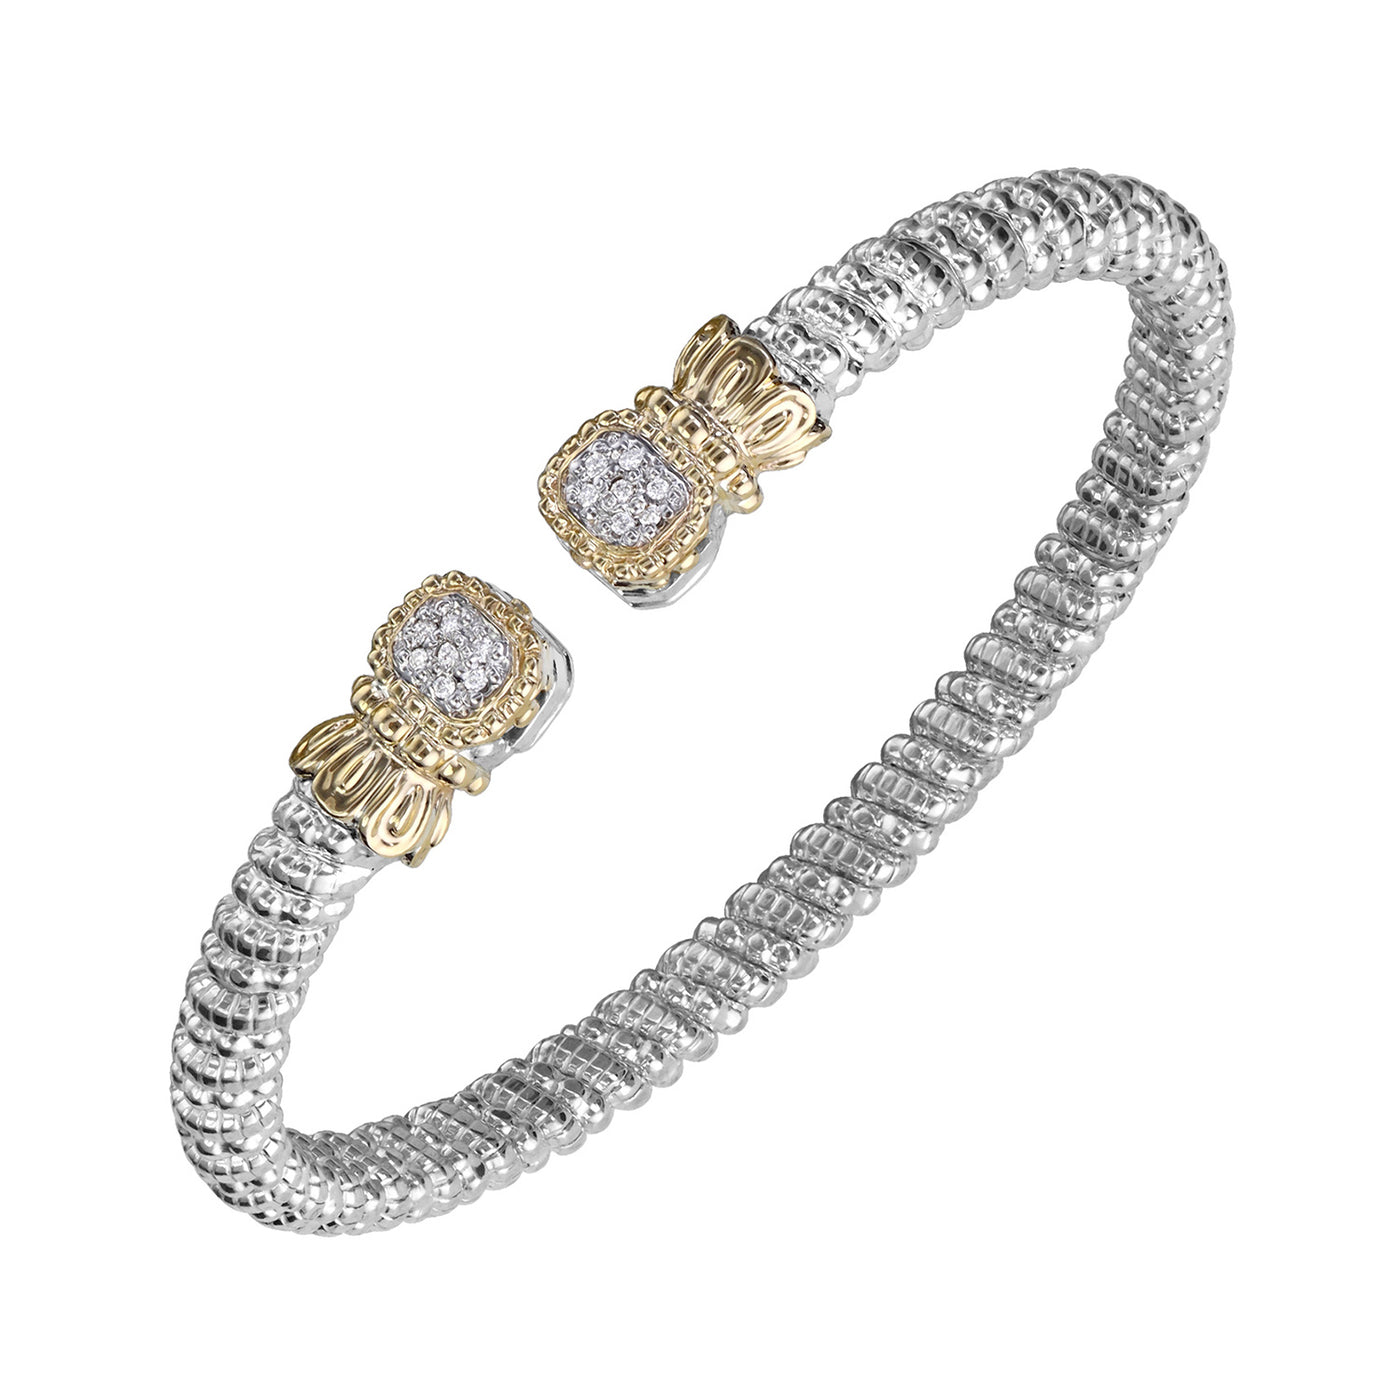 Vahan Sterling Silver and 14k Yellow Gold Moiré Beaded® Cuff Bracelet with Diamonds – 21645D